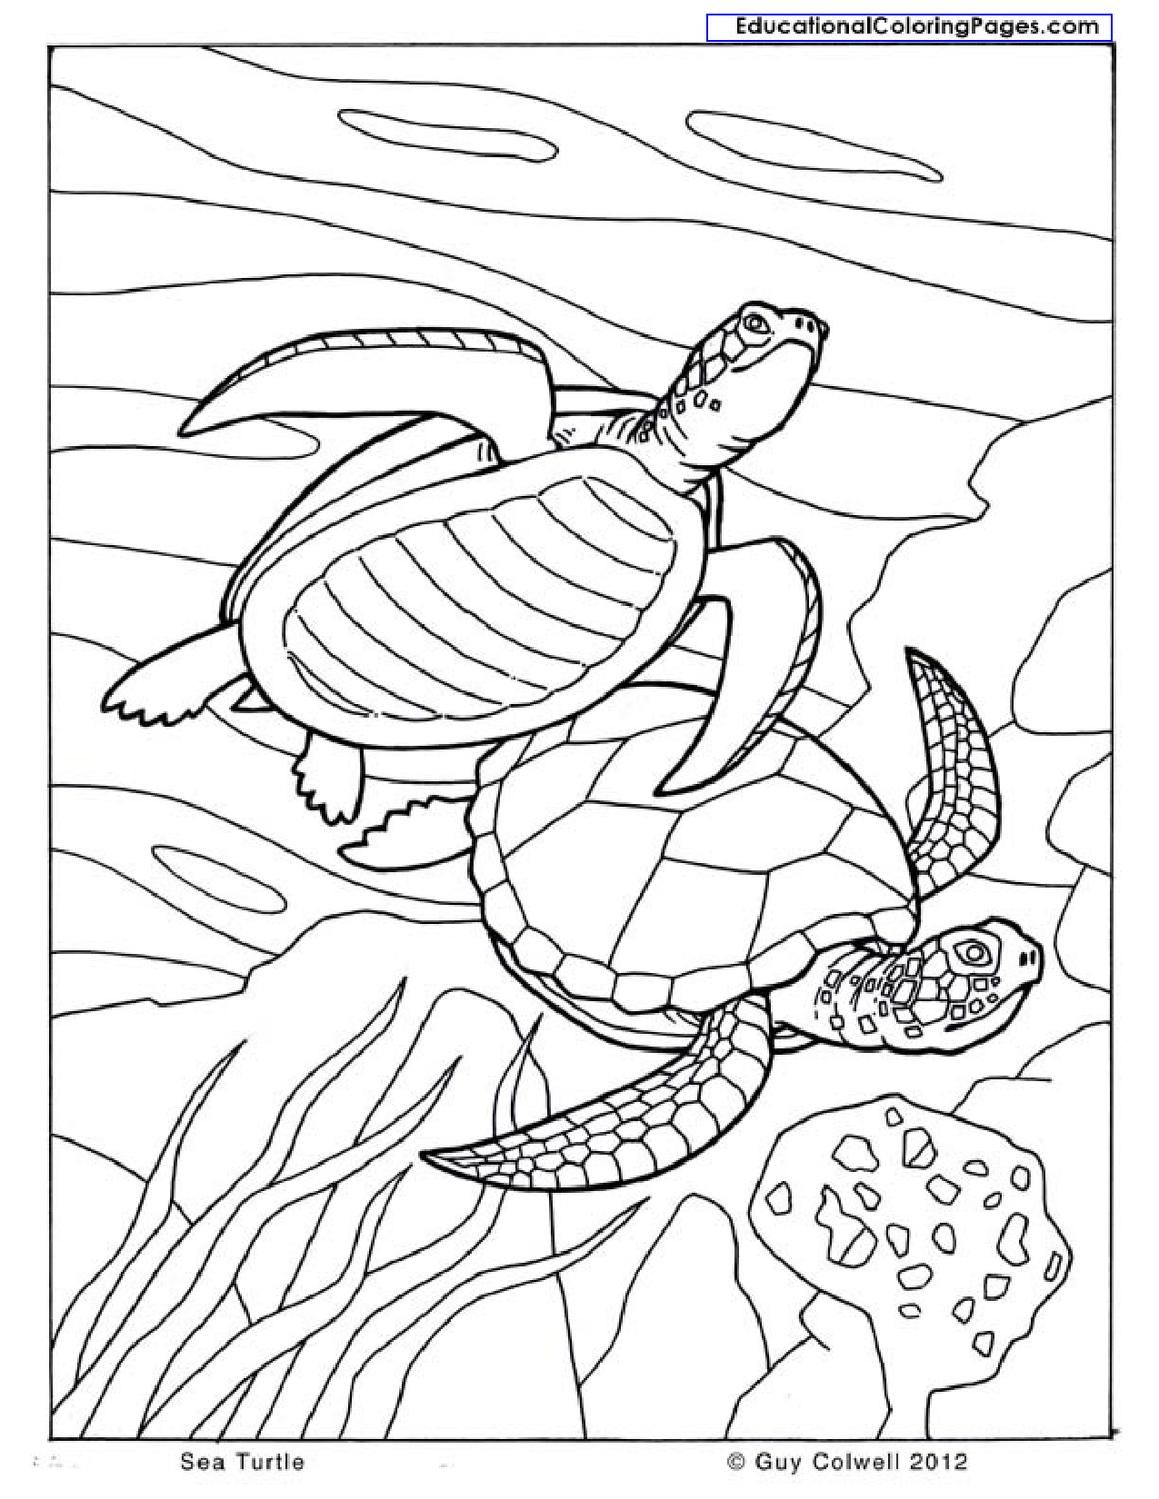 Natural coloring books turtle coloring pages animal coloring pages ocean coloring pages